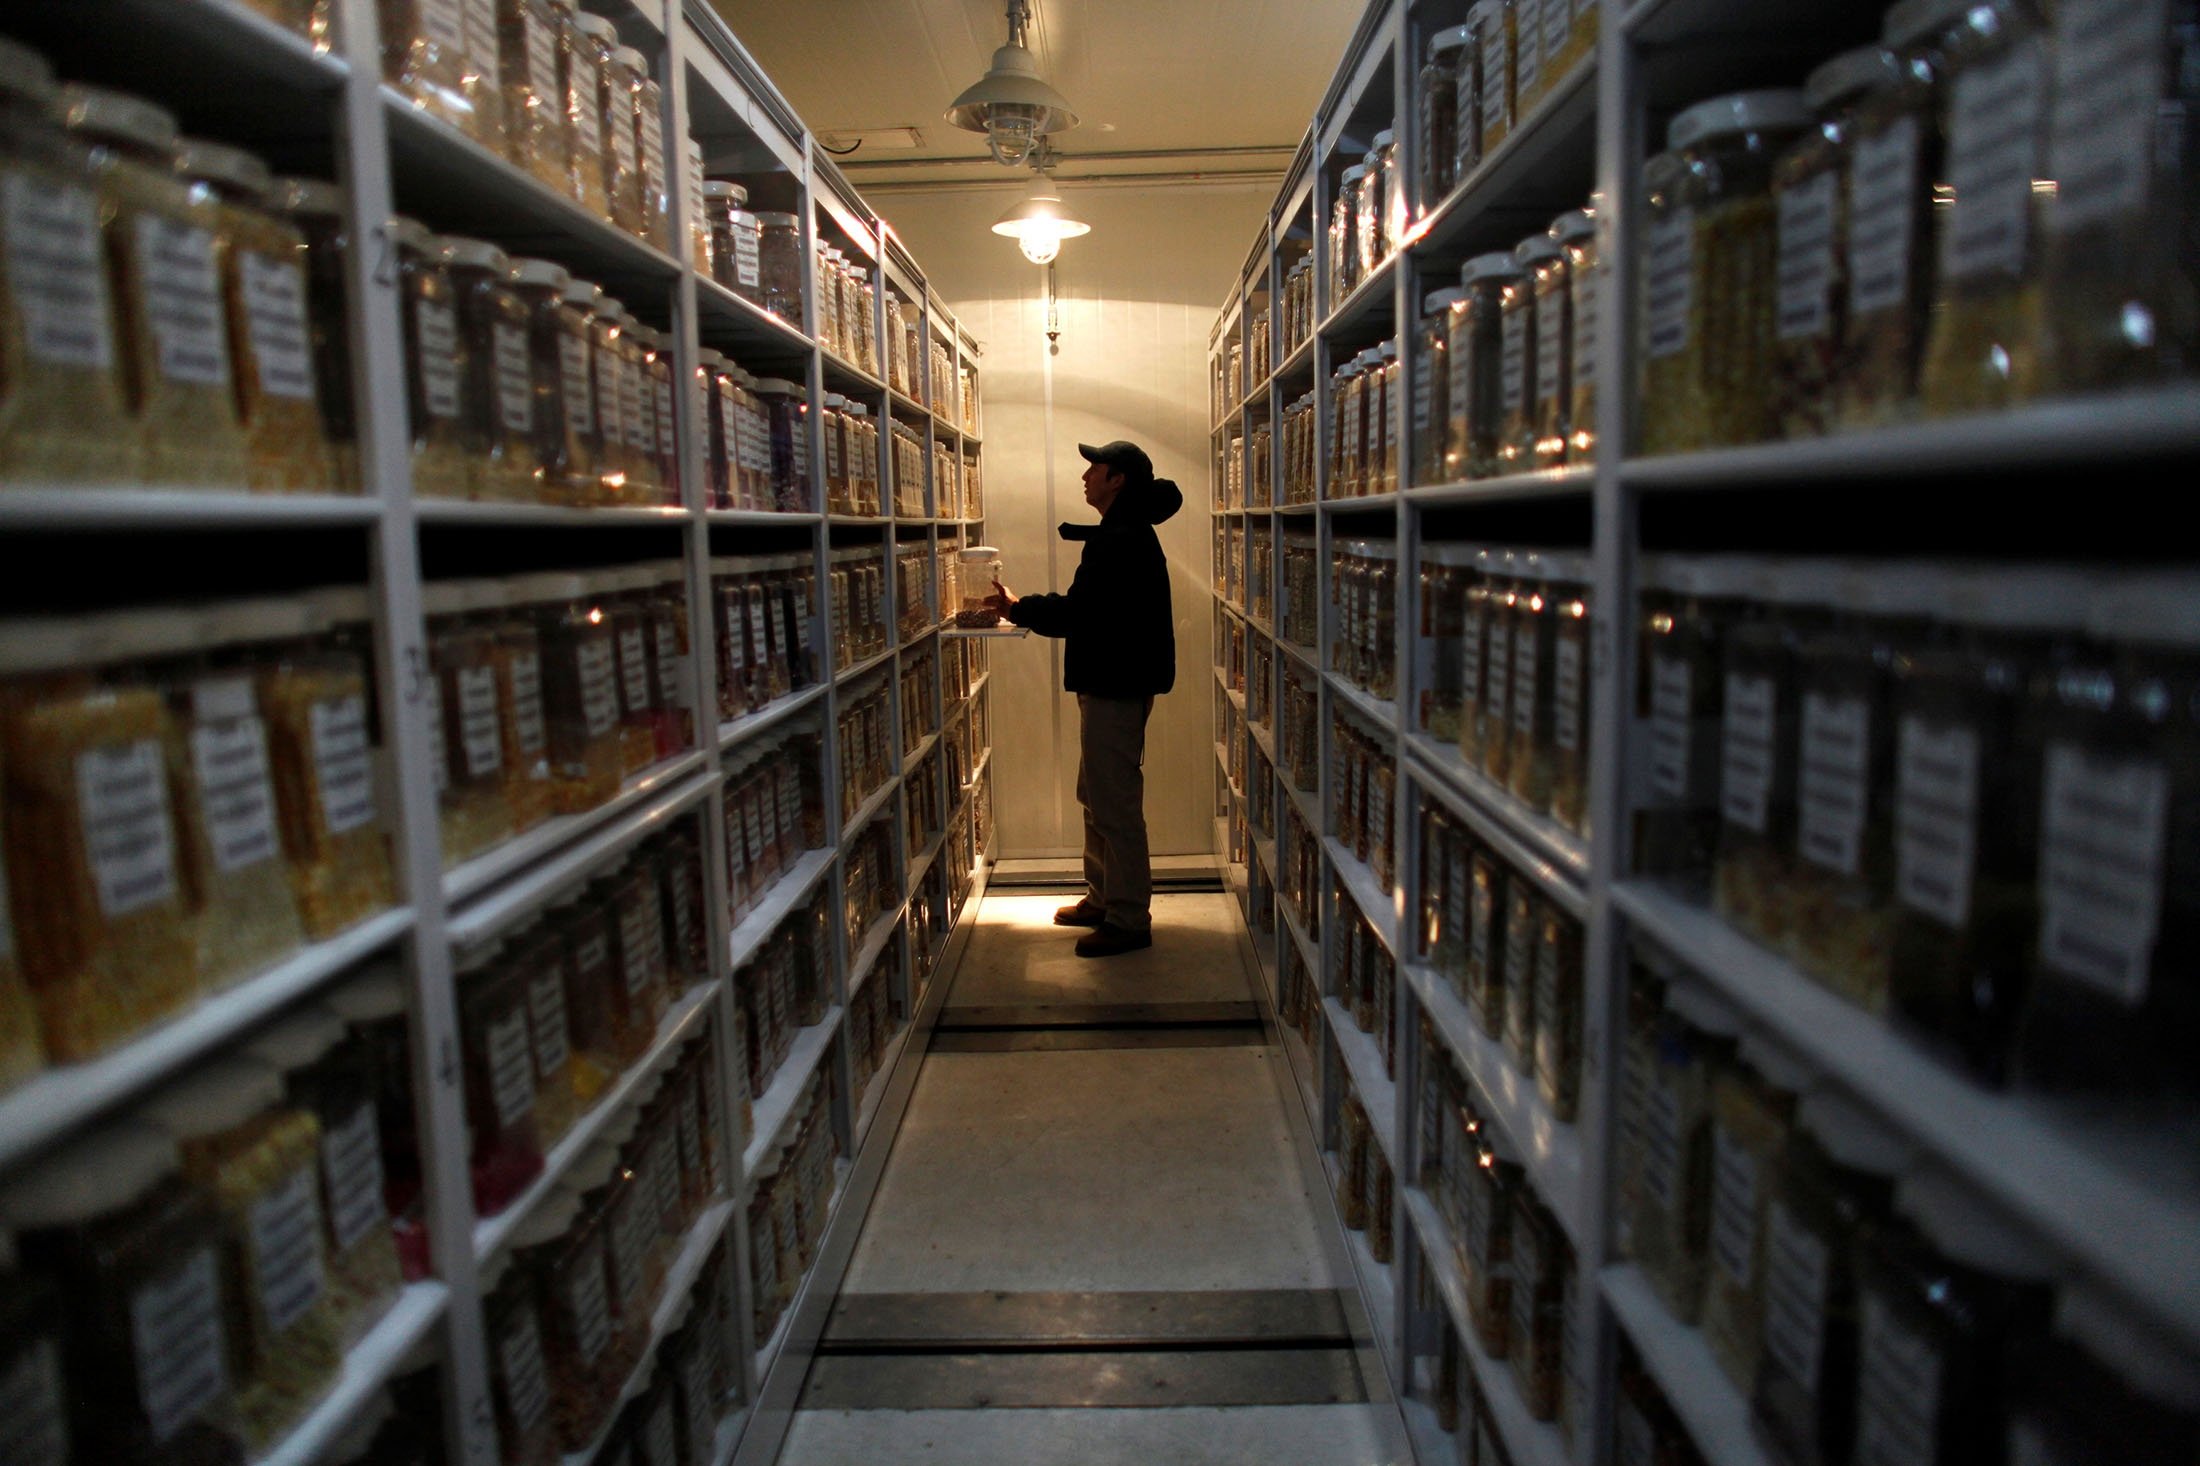 A scientist stands in a storage room for grains in the International Maize and Wheat Improvement Center (CIMMYT) in El Batan on the outskirts of Mexico City, Mexico, Aug. 31, 2010. (REUTERS Photo)